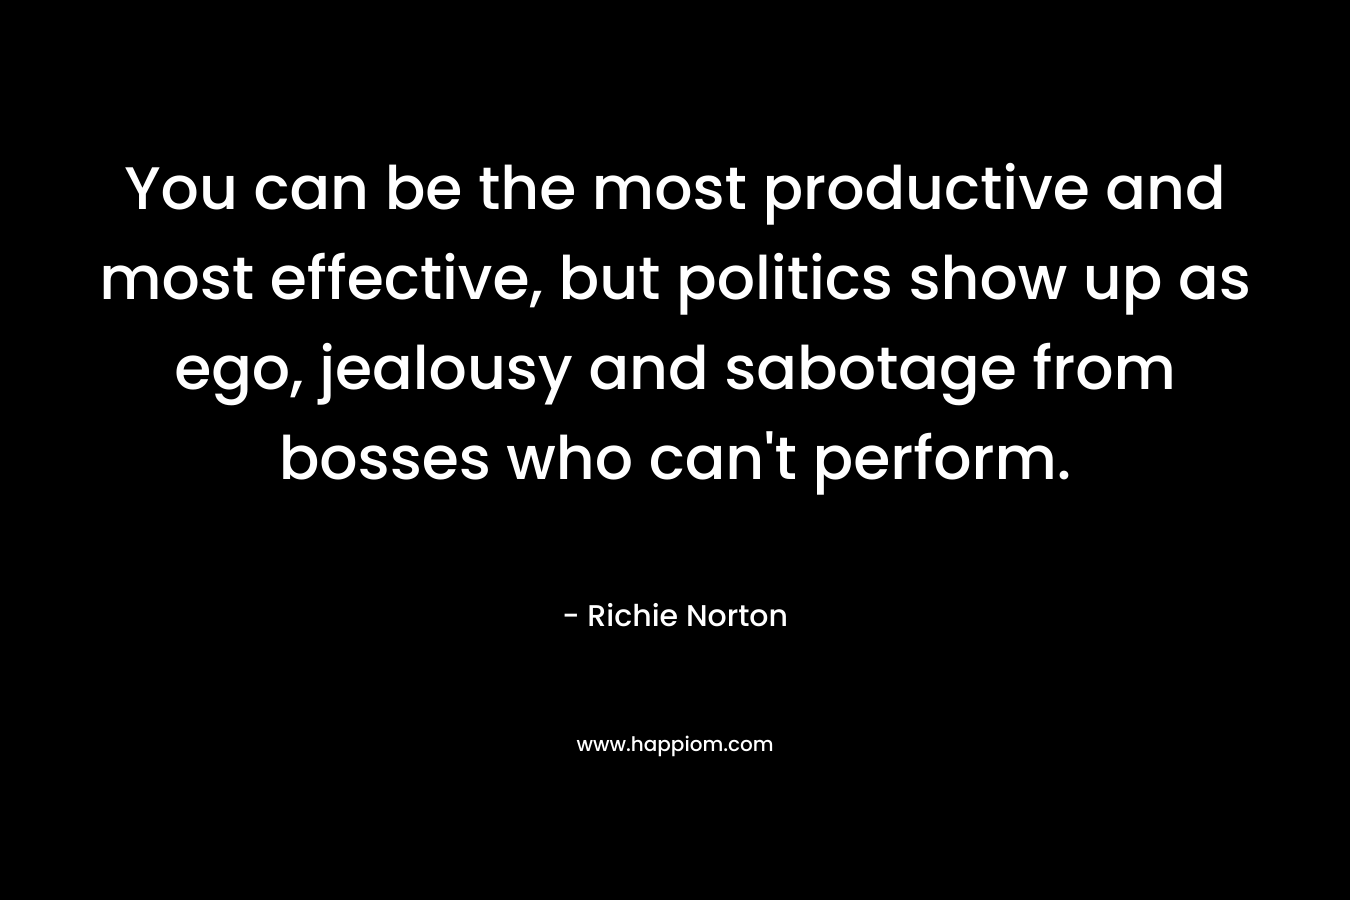 You can be the most productive and most effective, but politics show up as ego, jealousy and sabotage from bosses who can’t perform. – Richie Norton